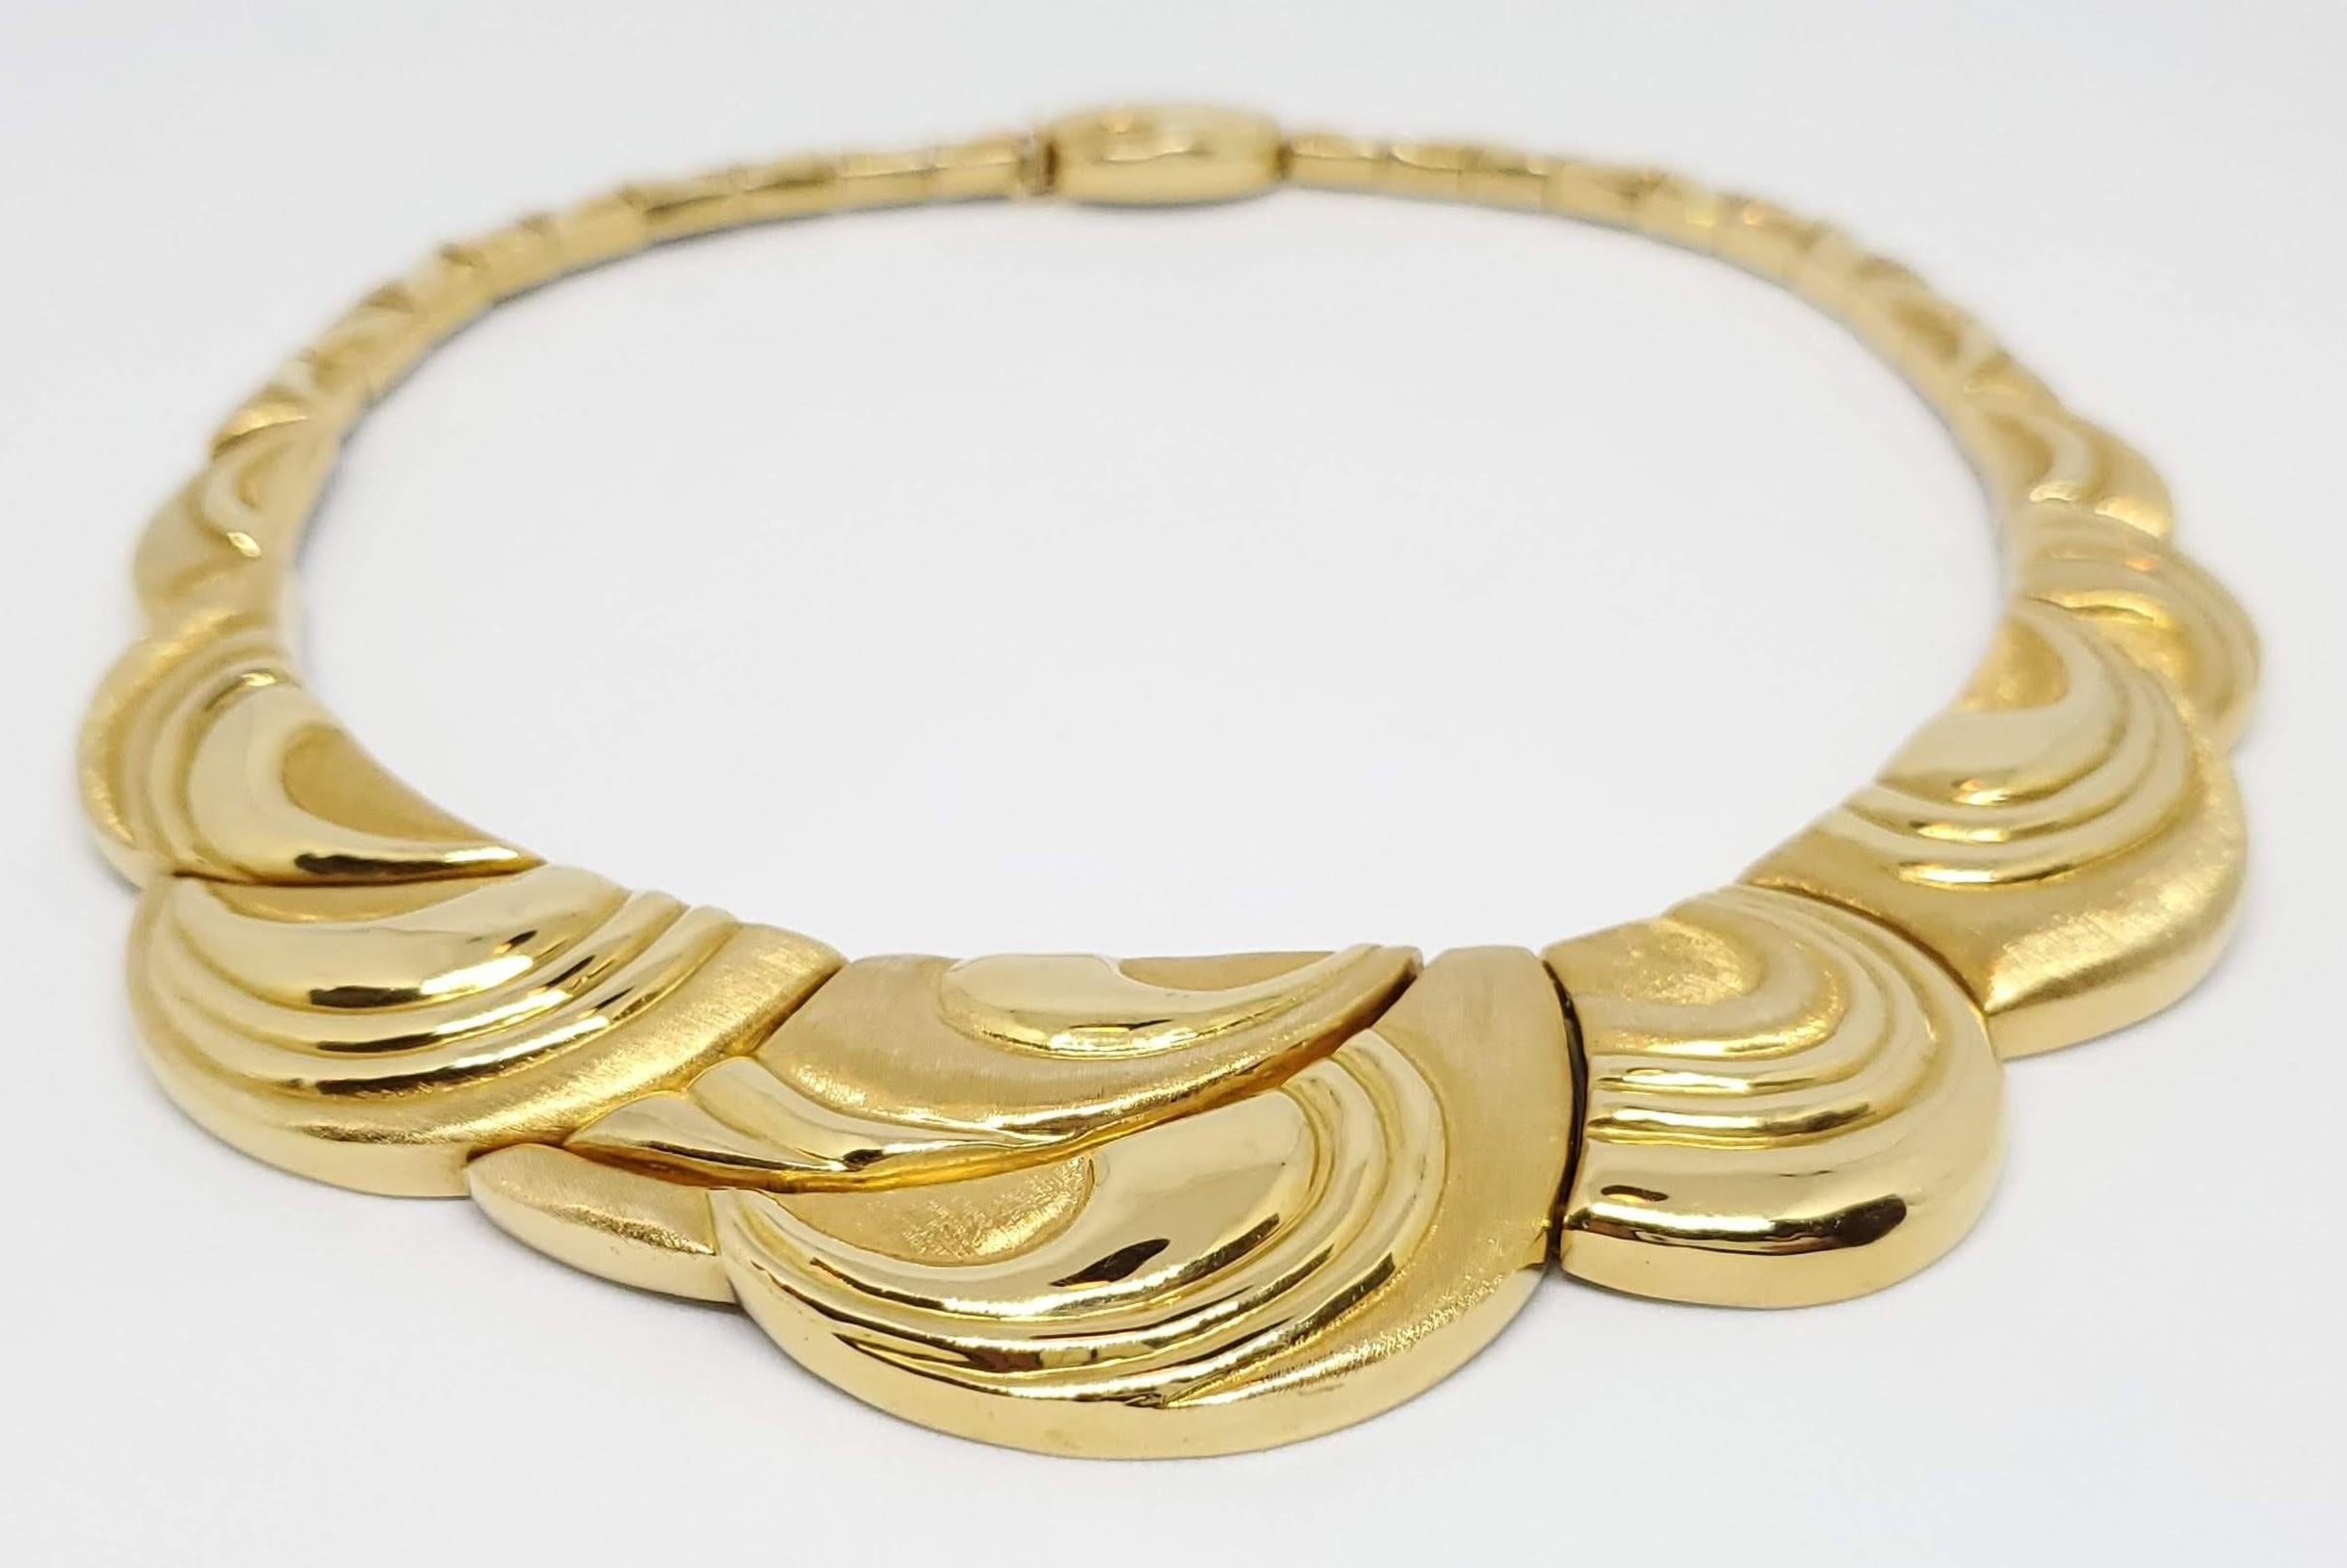 Burle Marx 18 Karat Gold Necklace In Excellent Condition For Sale In Woodway, TX